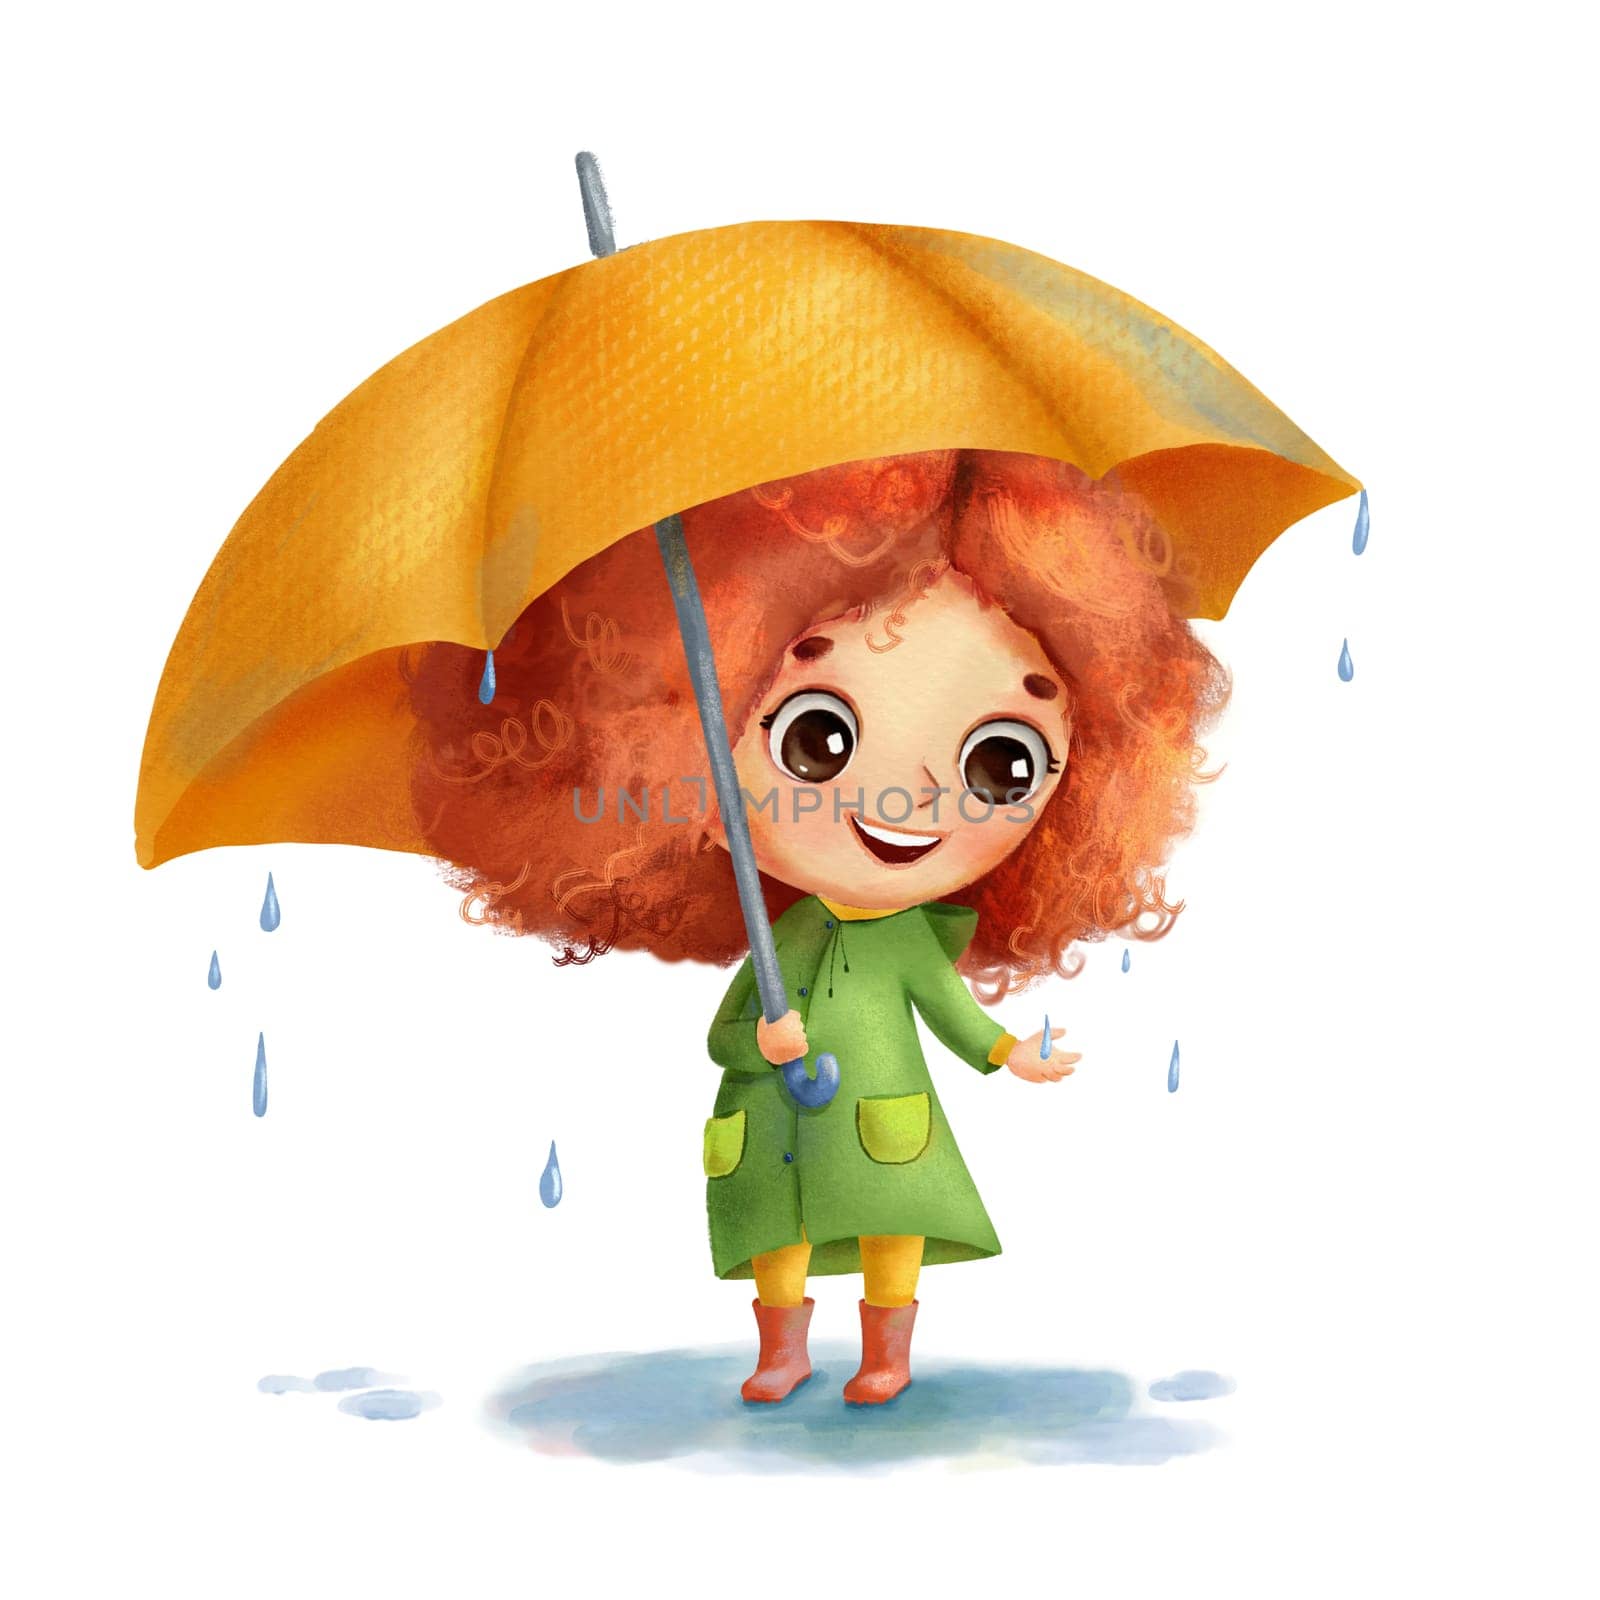 Funny little cartoon girl with umbrella stands in puddle in rain and smiles. Hand drawn illustration for children isolated on white. by ElenaPlatova